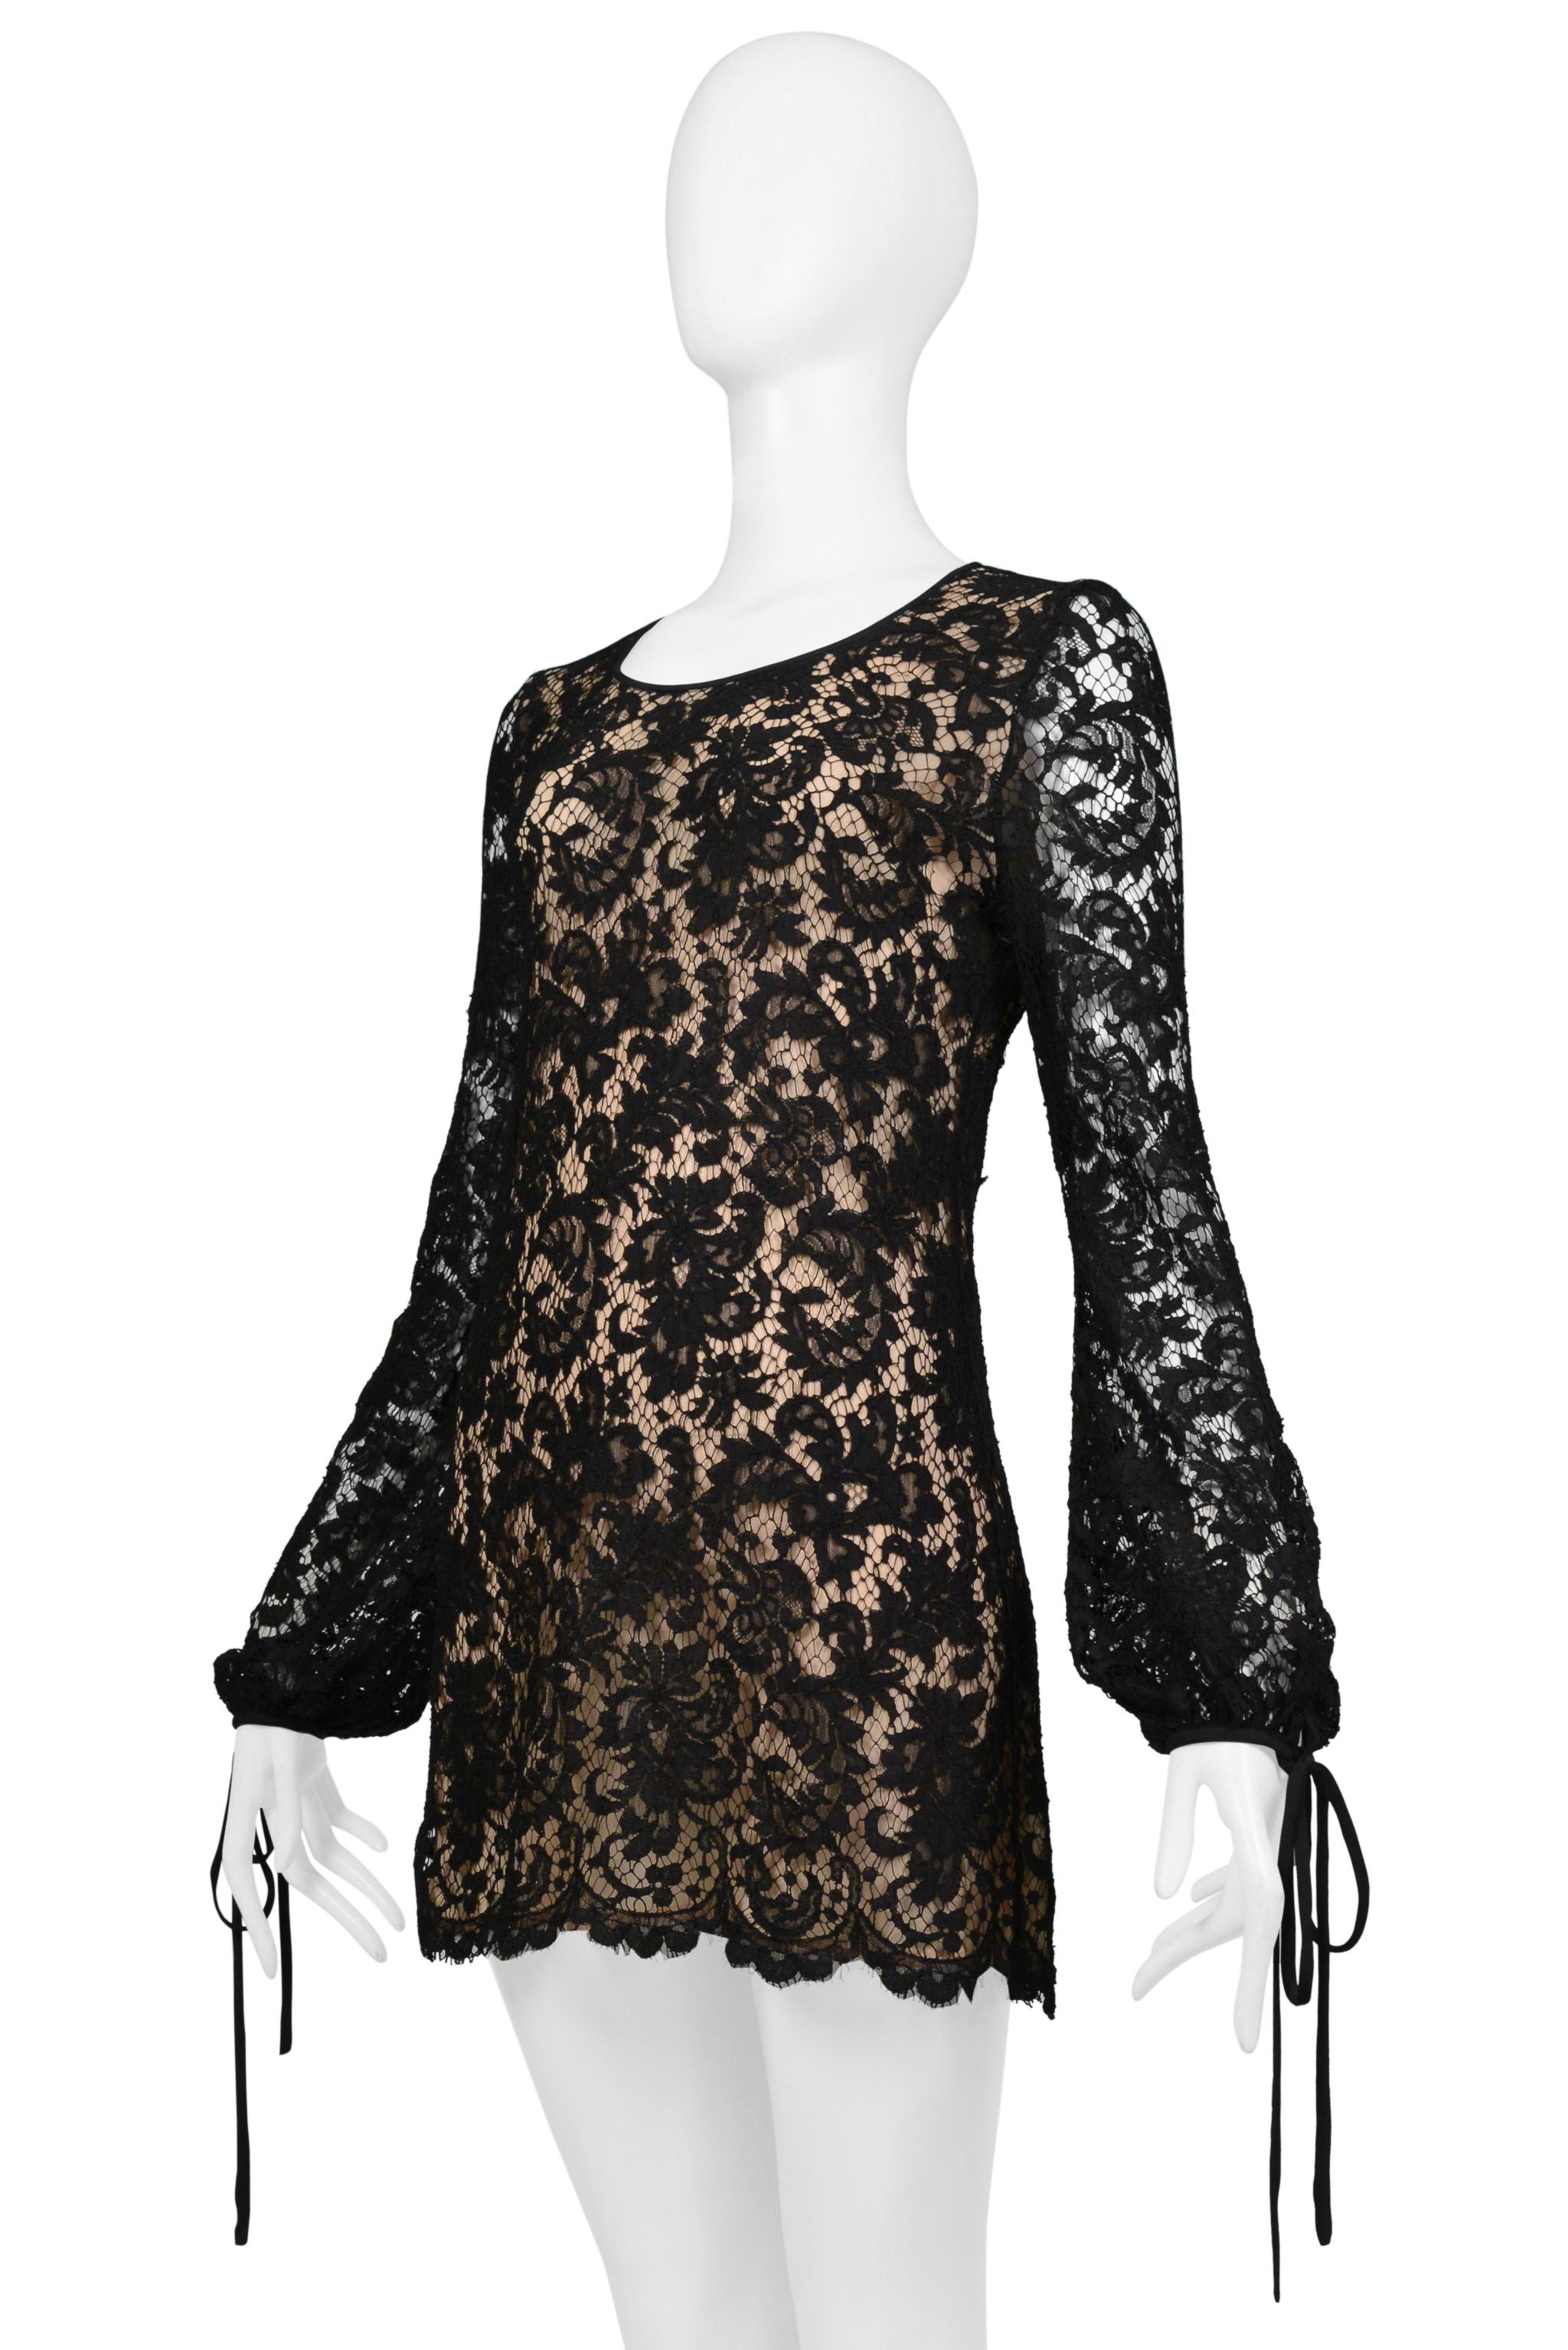 Stunning Gucci By Tom Ford 1996 Black Lace Mini Dress with Original Tags  4